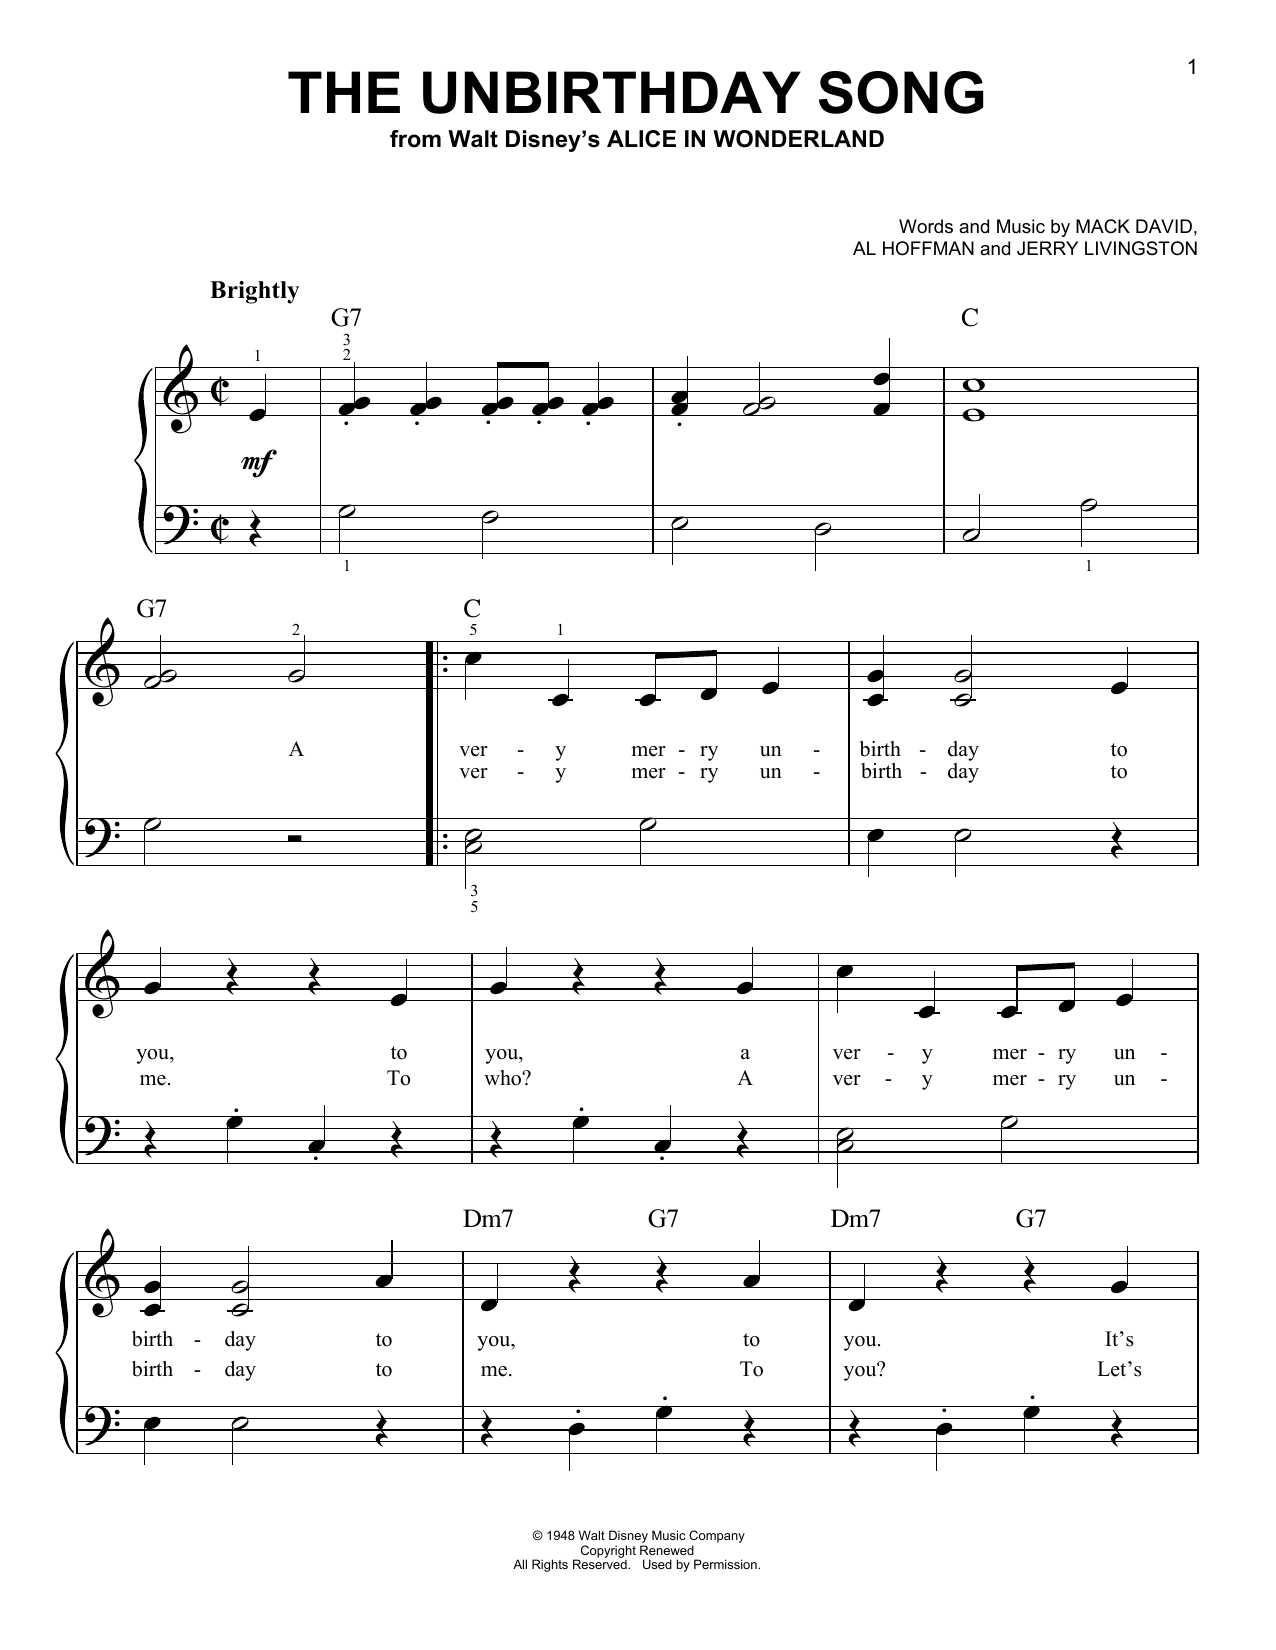 Mack David The Unbirthday Song (from Disney's Alice In Wonderland) sheet music notes and chords. Download Printable PDF.